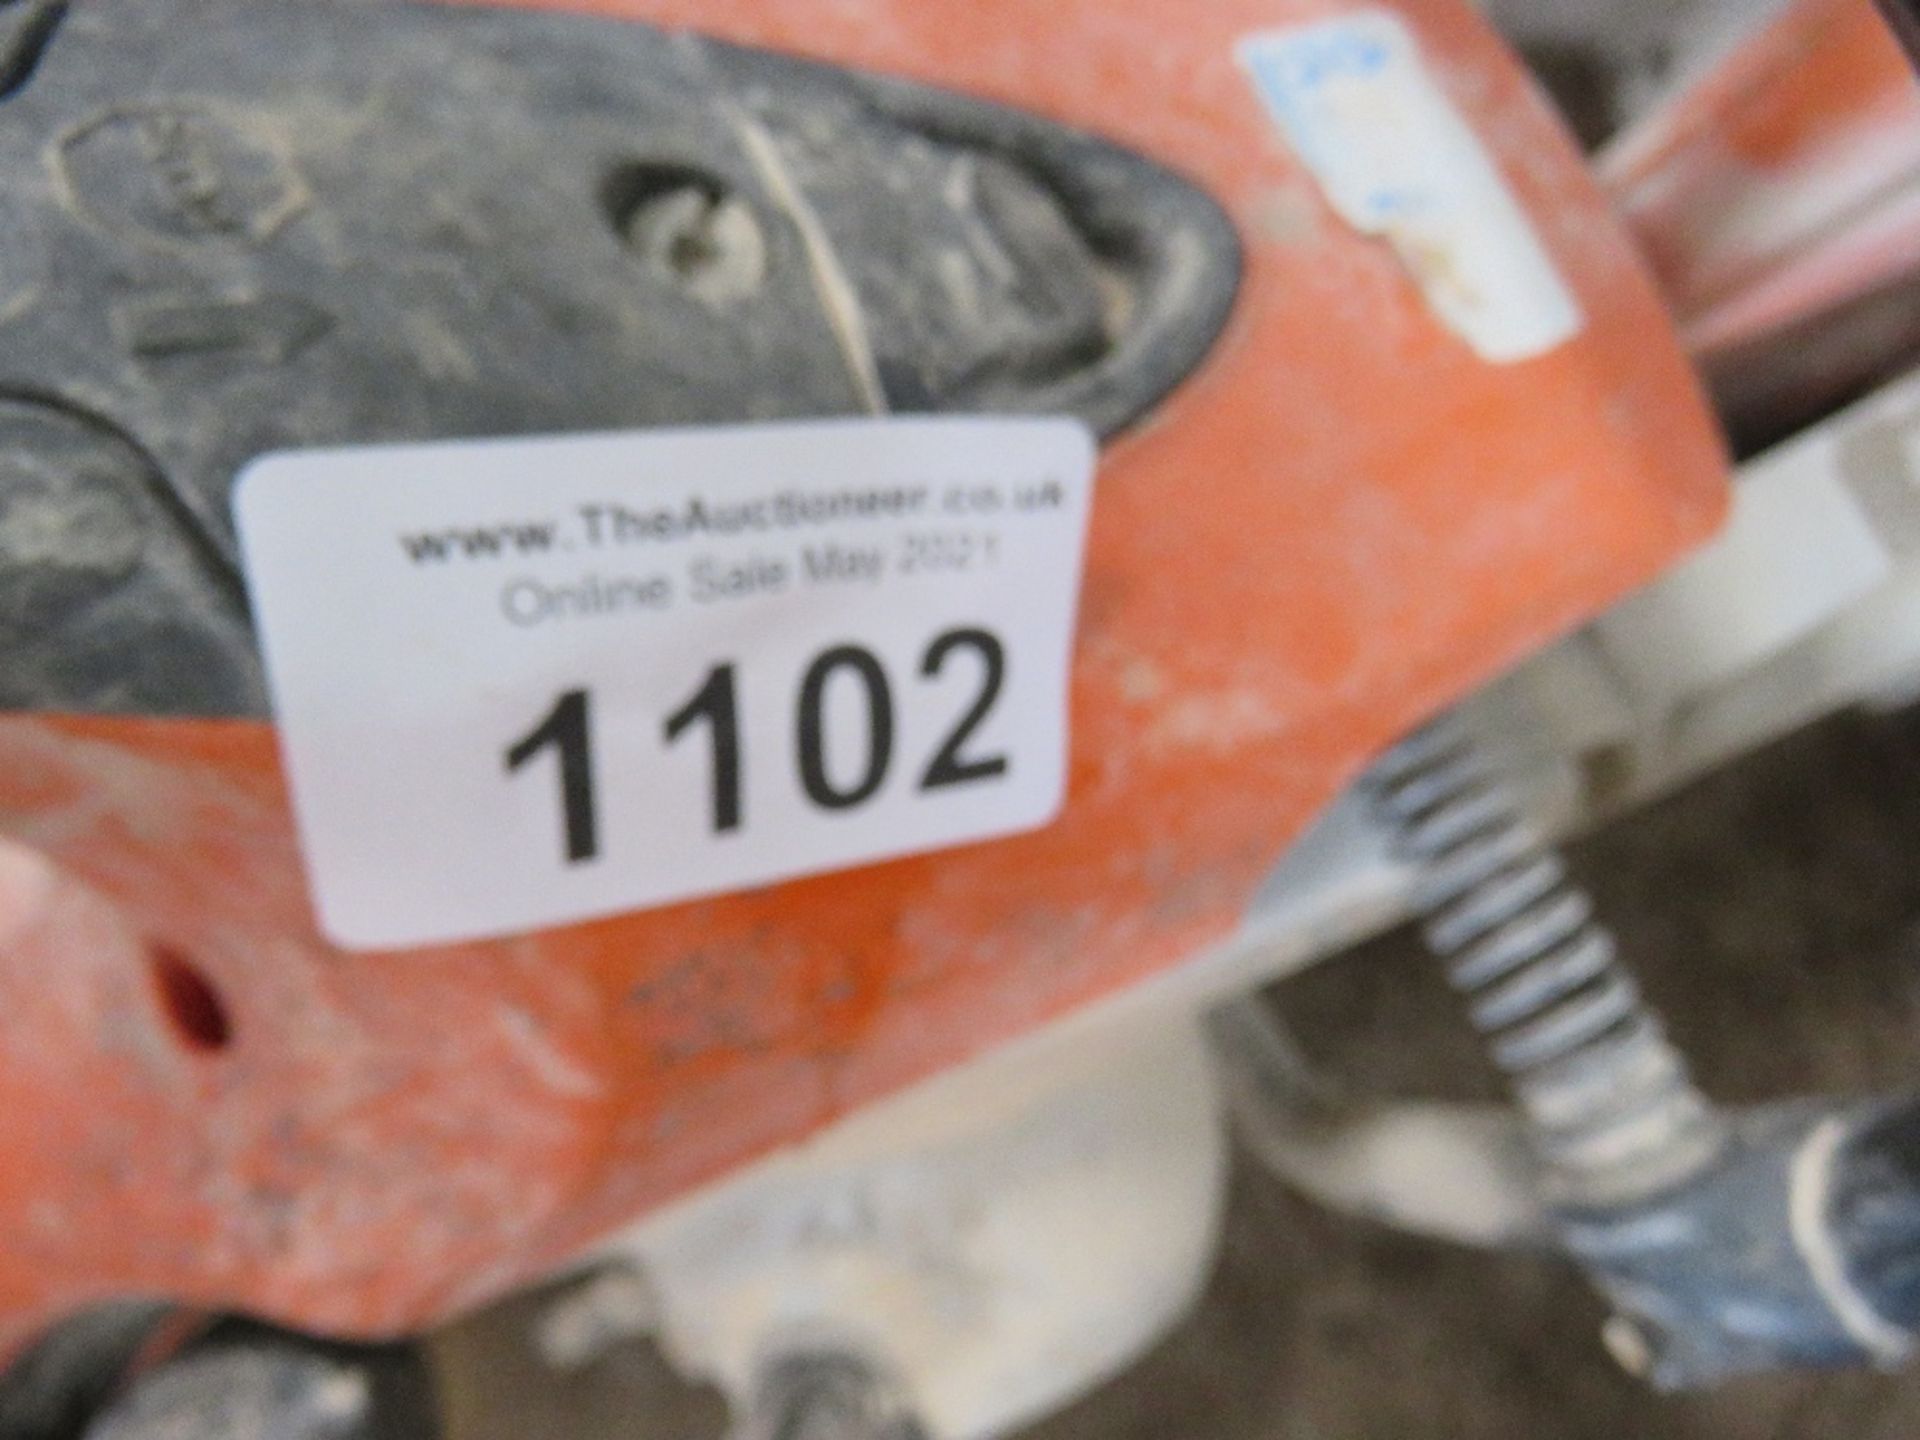 STIHL TS410 PETROL SAW, UNTESTED, CONDITION UNKNOWN. - Image 3 of 3